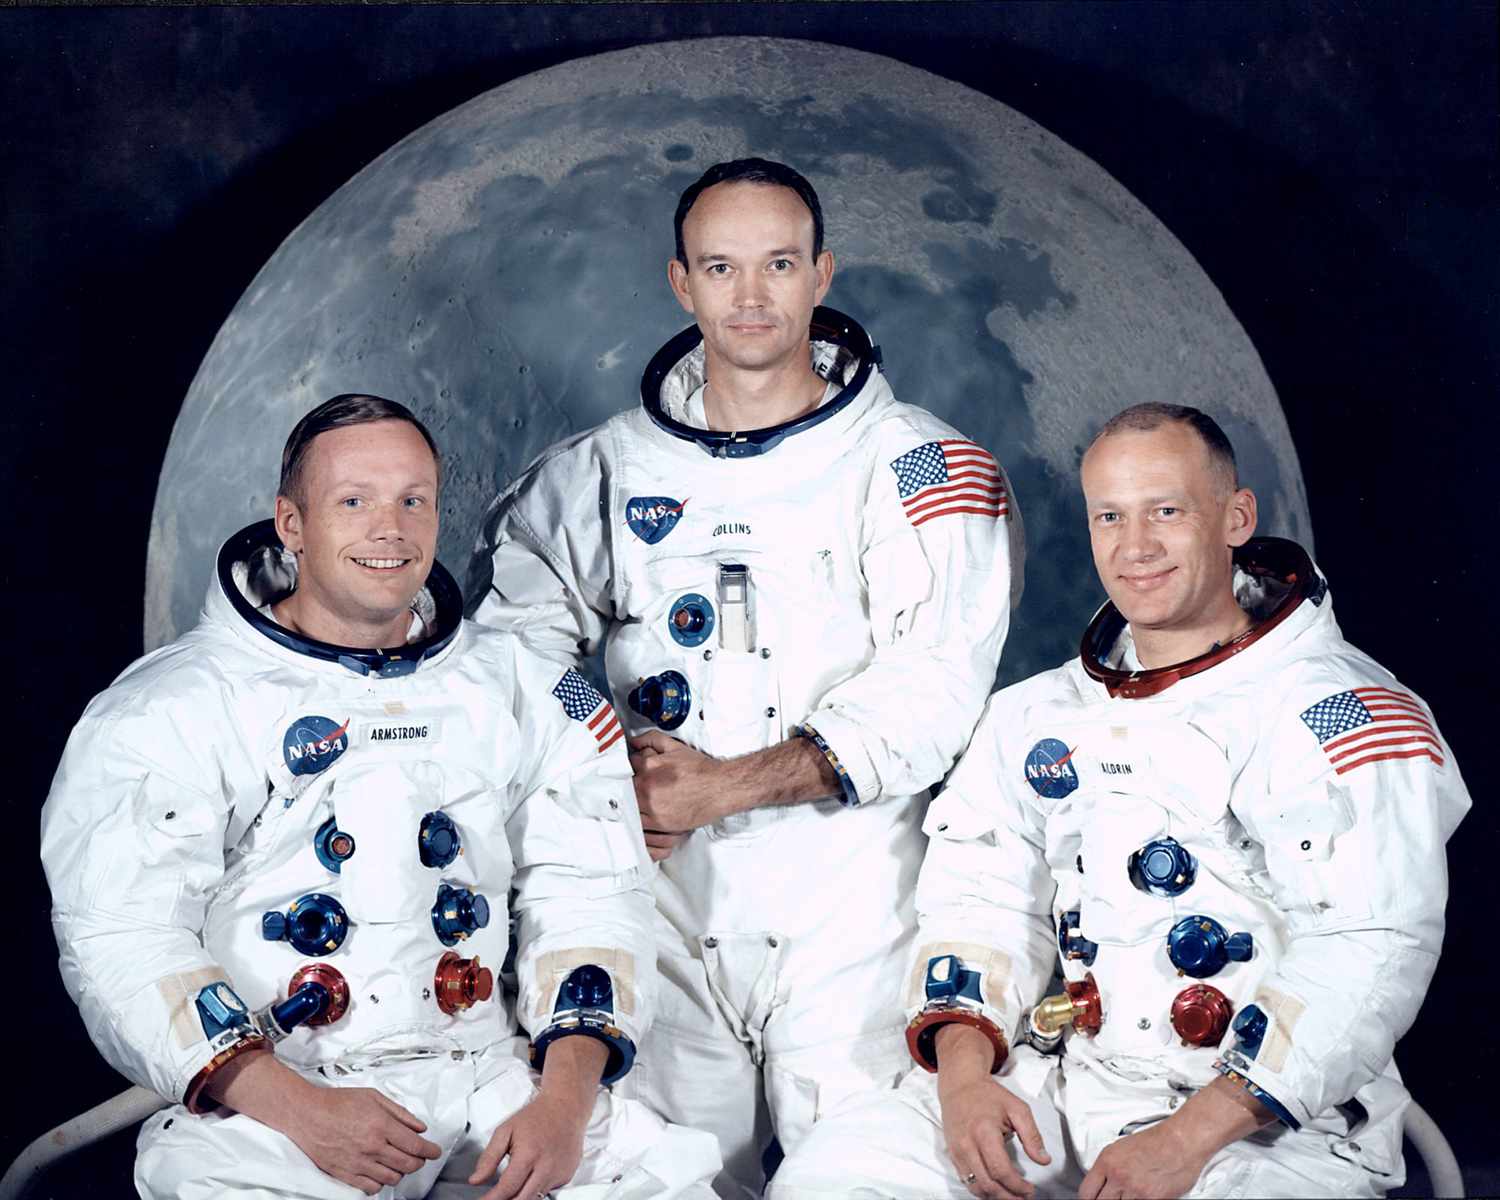 Group portrait of Apollo 11 lunar landing mission astronauts (L-R) Neil Armstrong, Michael Collins and Edwin Aldrin Jr. in spacesuits, at Manned Spacecraft Center.